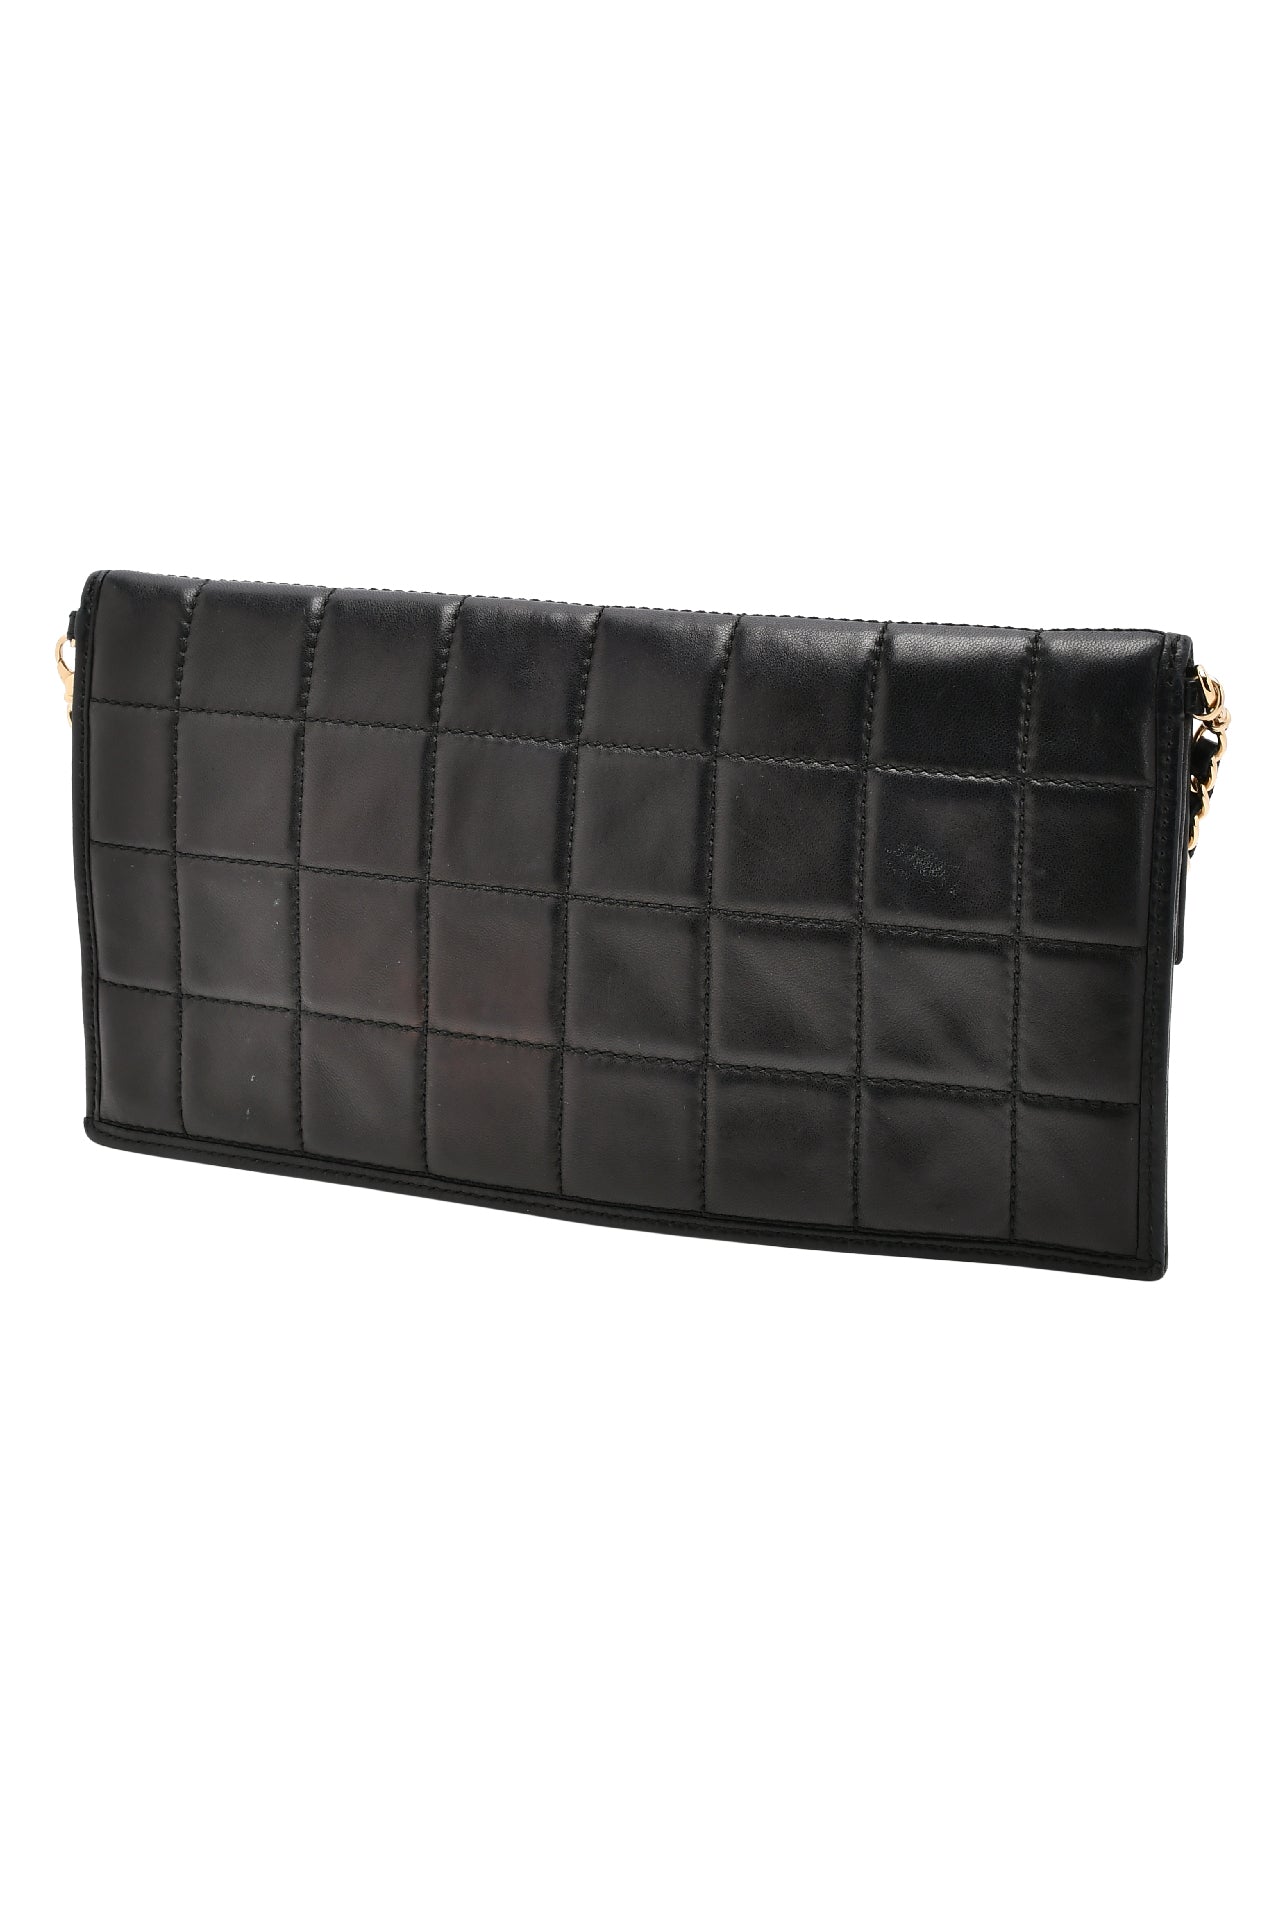 Chanel Box Quilted Fold Down Envelope Clutch Bag